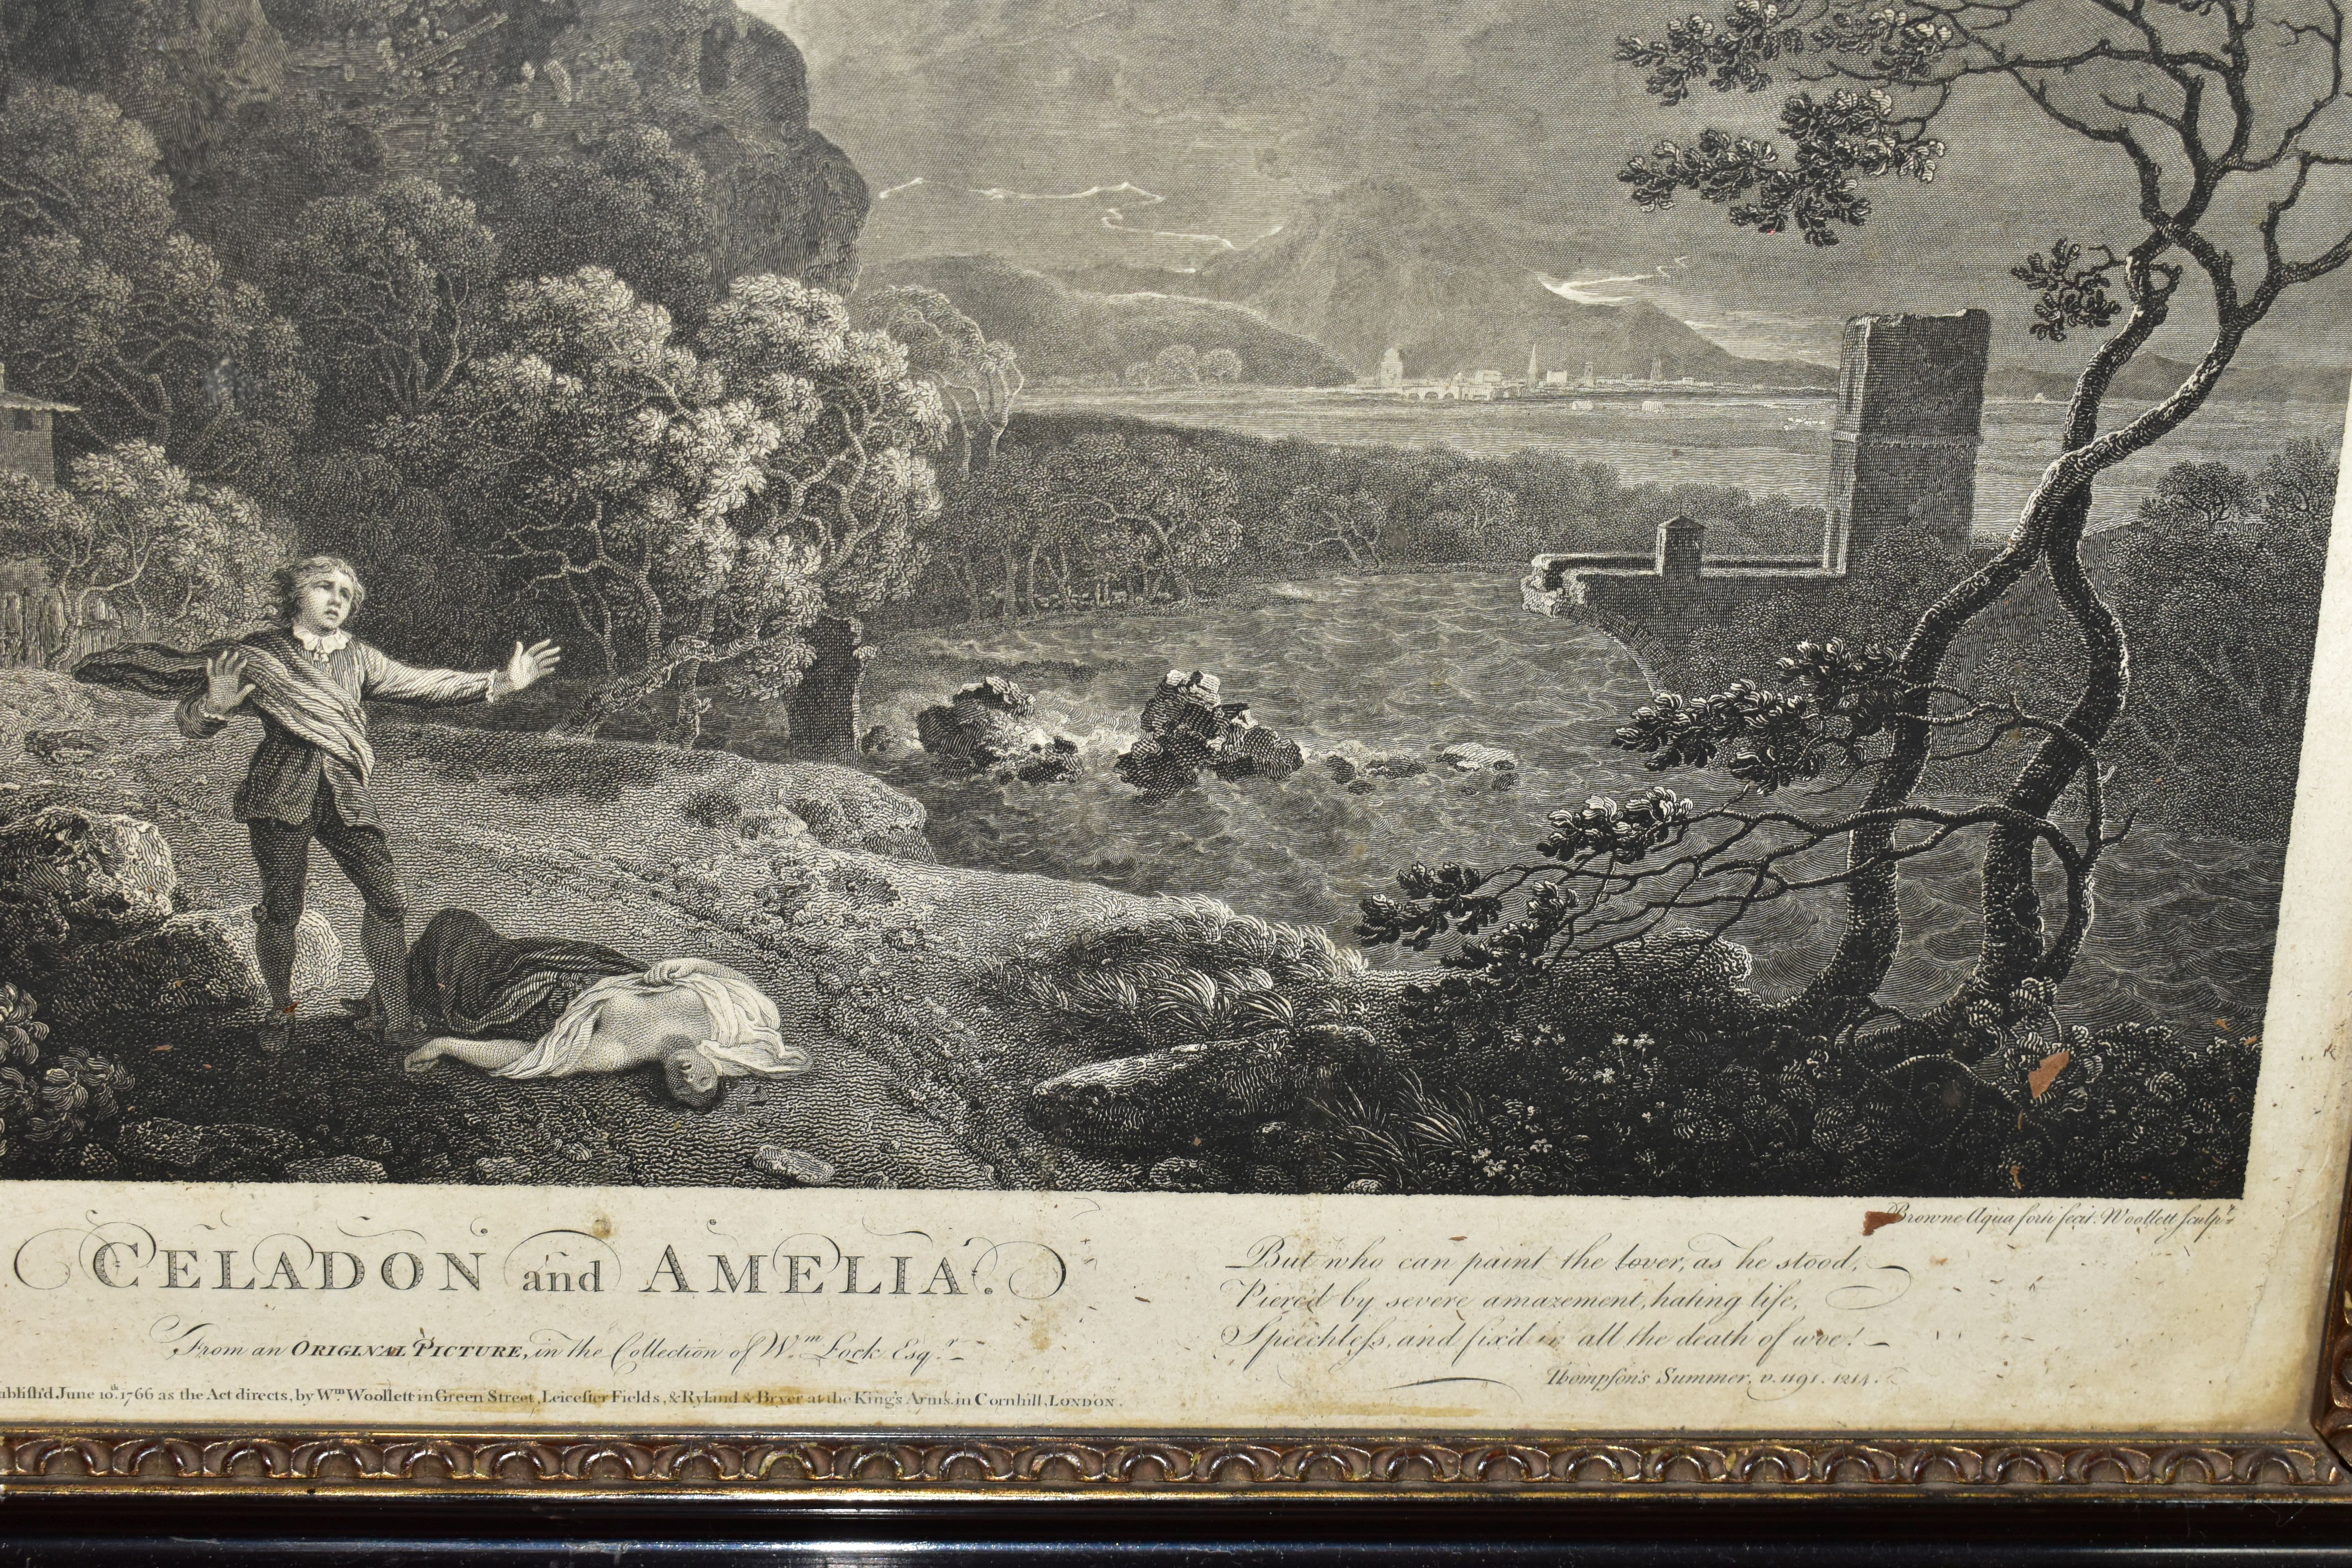 TWO EIGHTEENTH CENTURY ENGRAVING PRINTS BY WILLIAM WOOLLETT, comprising 'Celadon and Amelia' after - Image 4 of 7